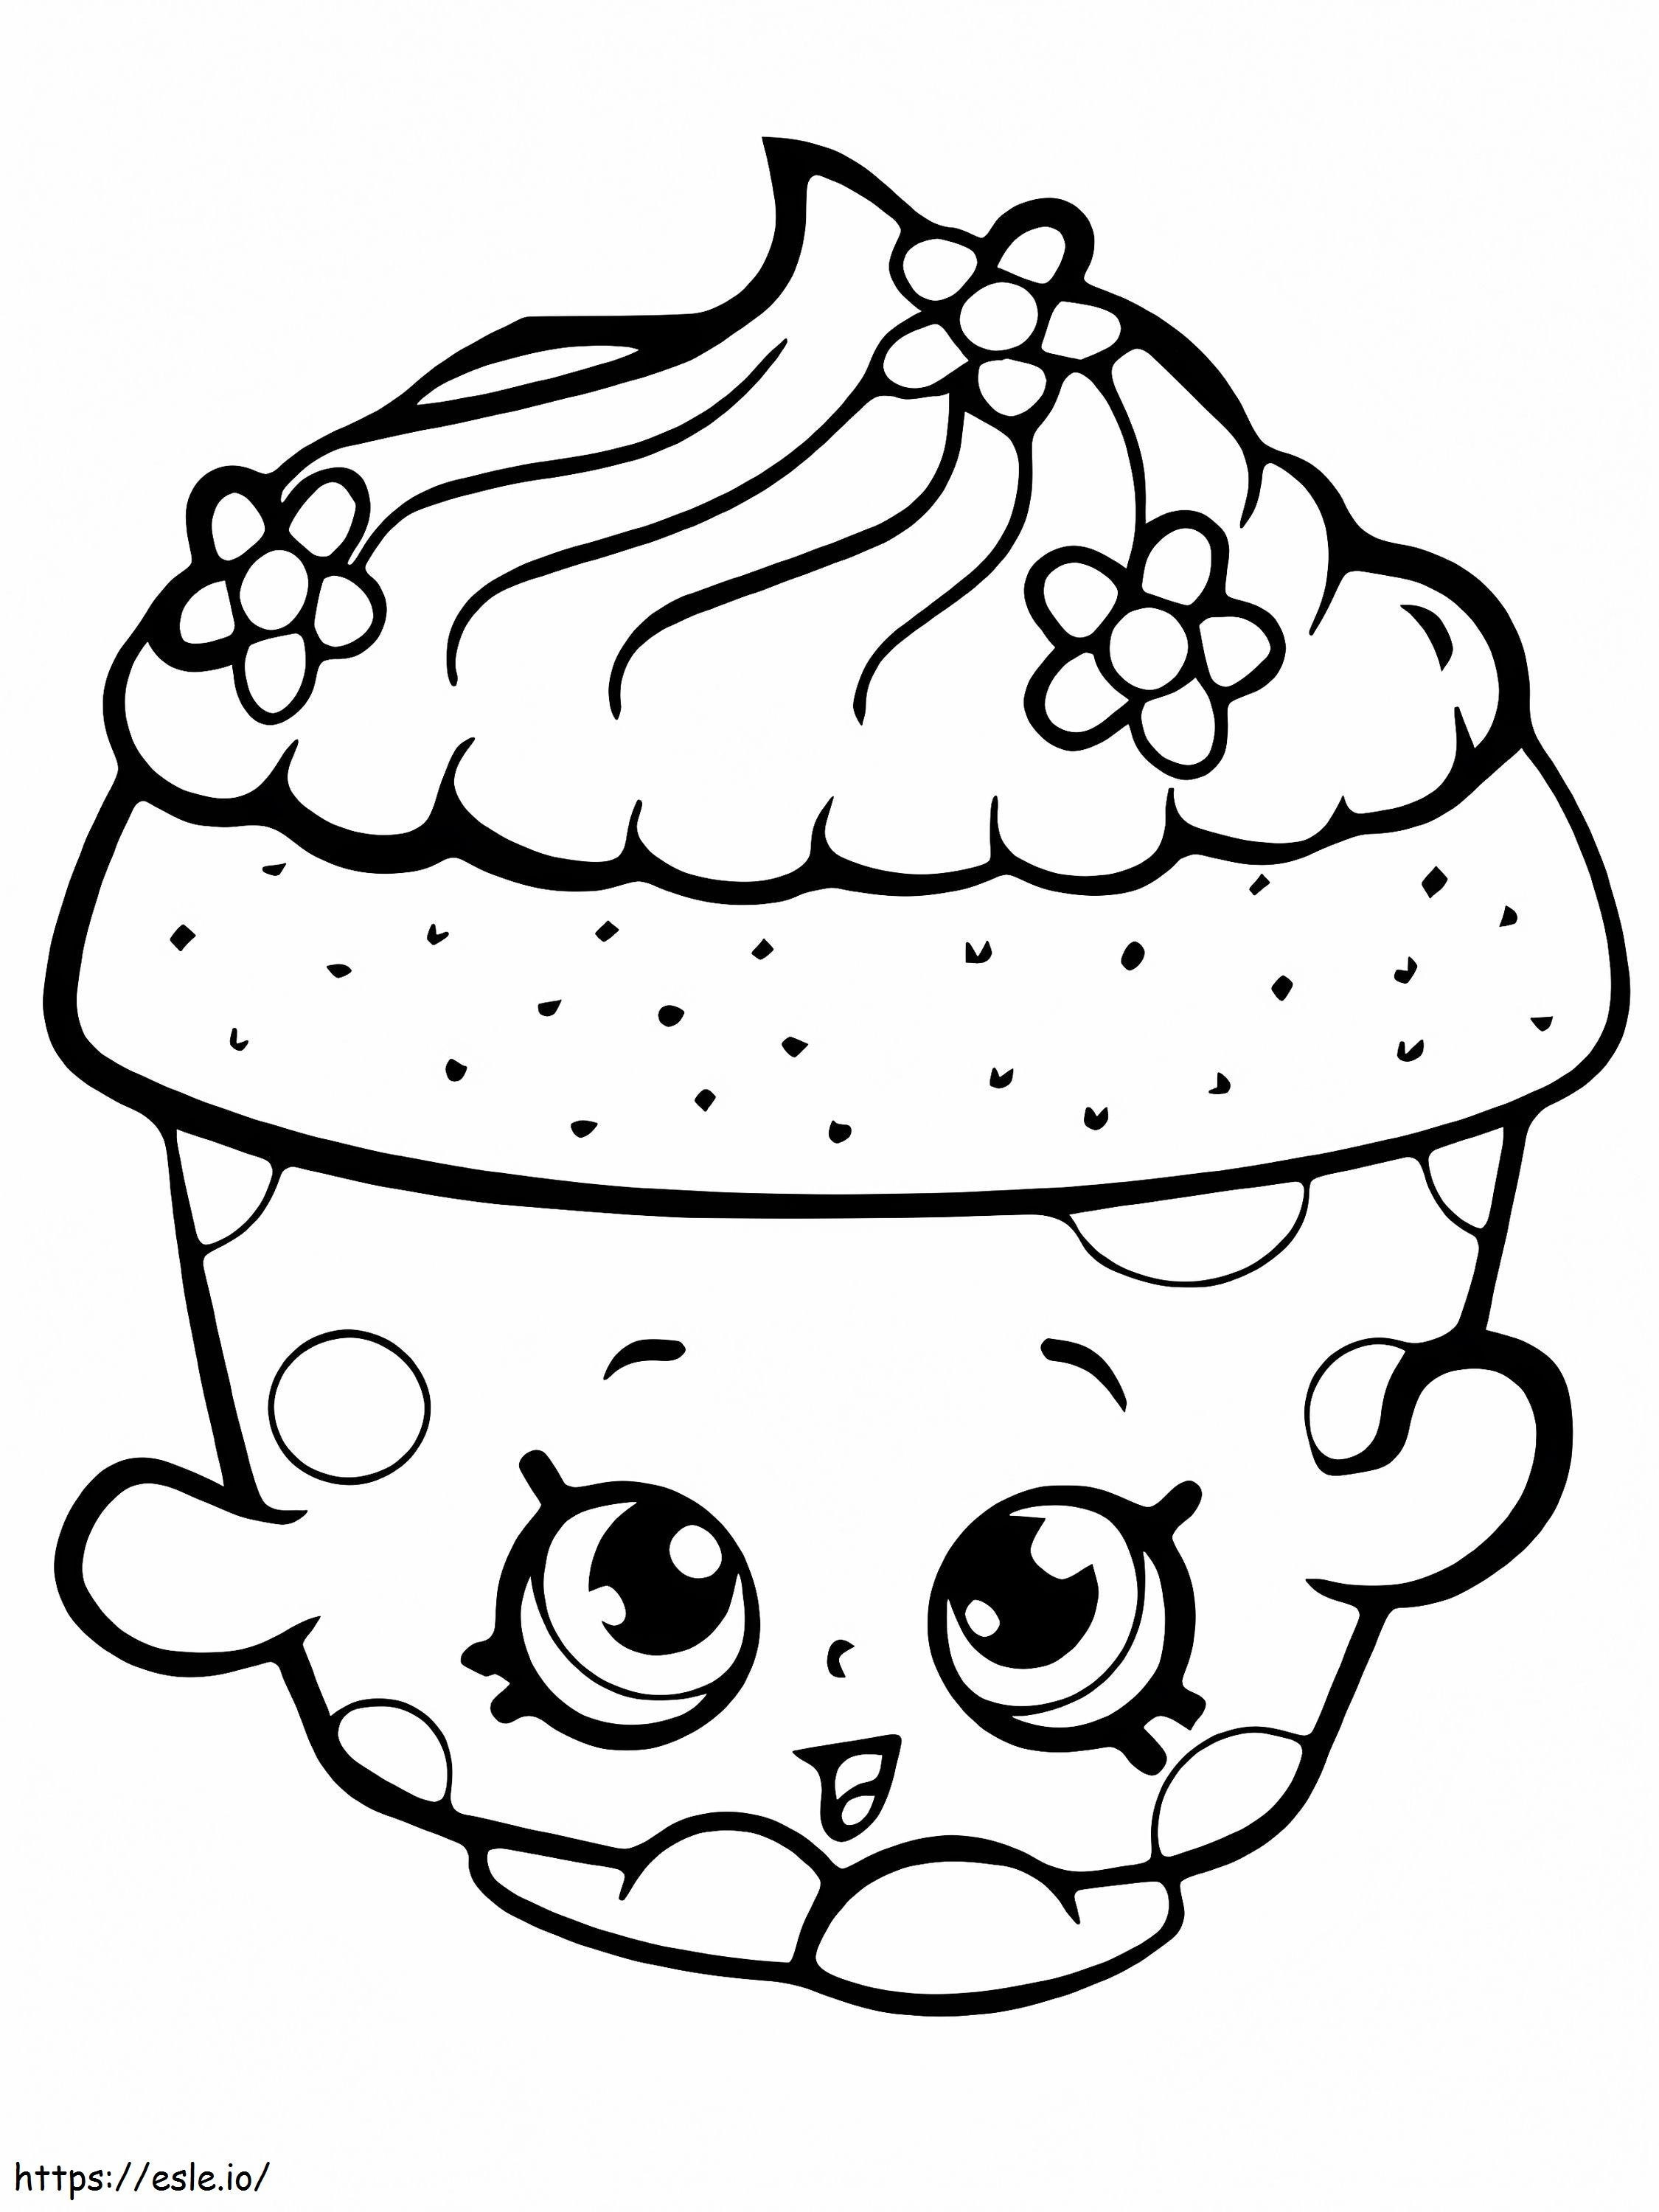 Cupcake With Kawaii Face coloring page